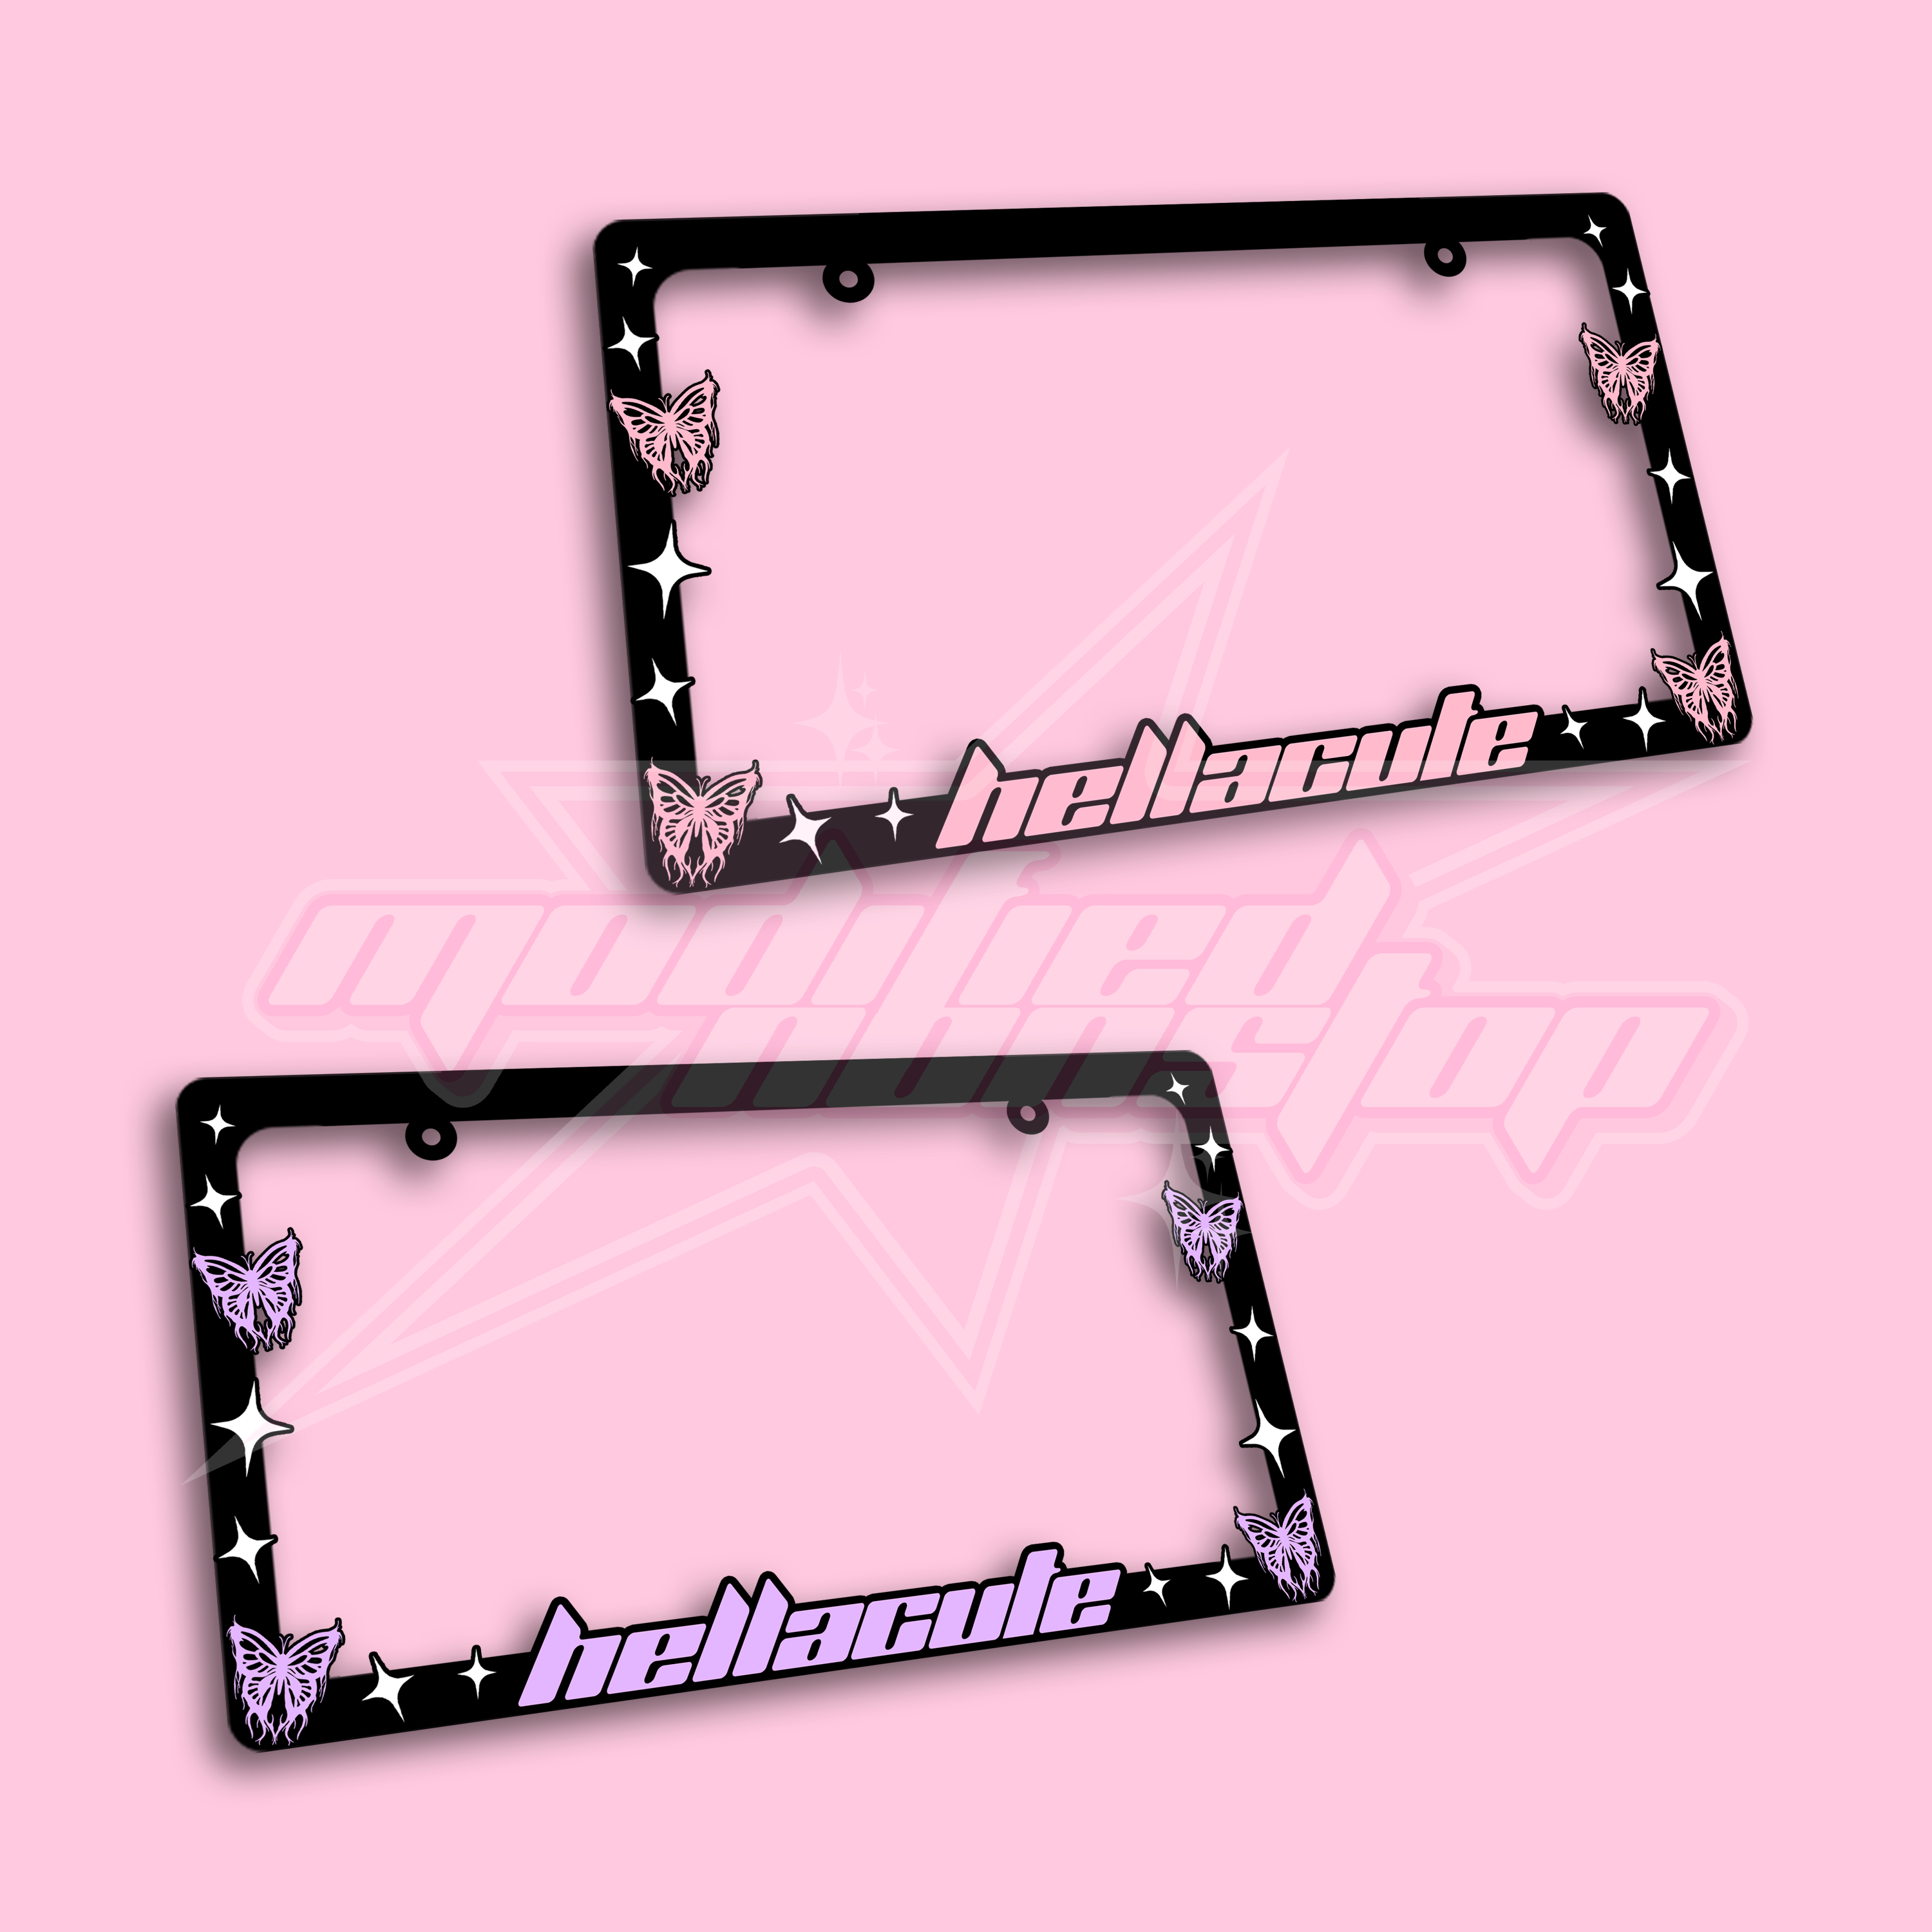 Butterfly License Plate Frame